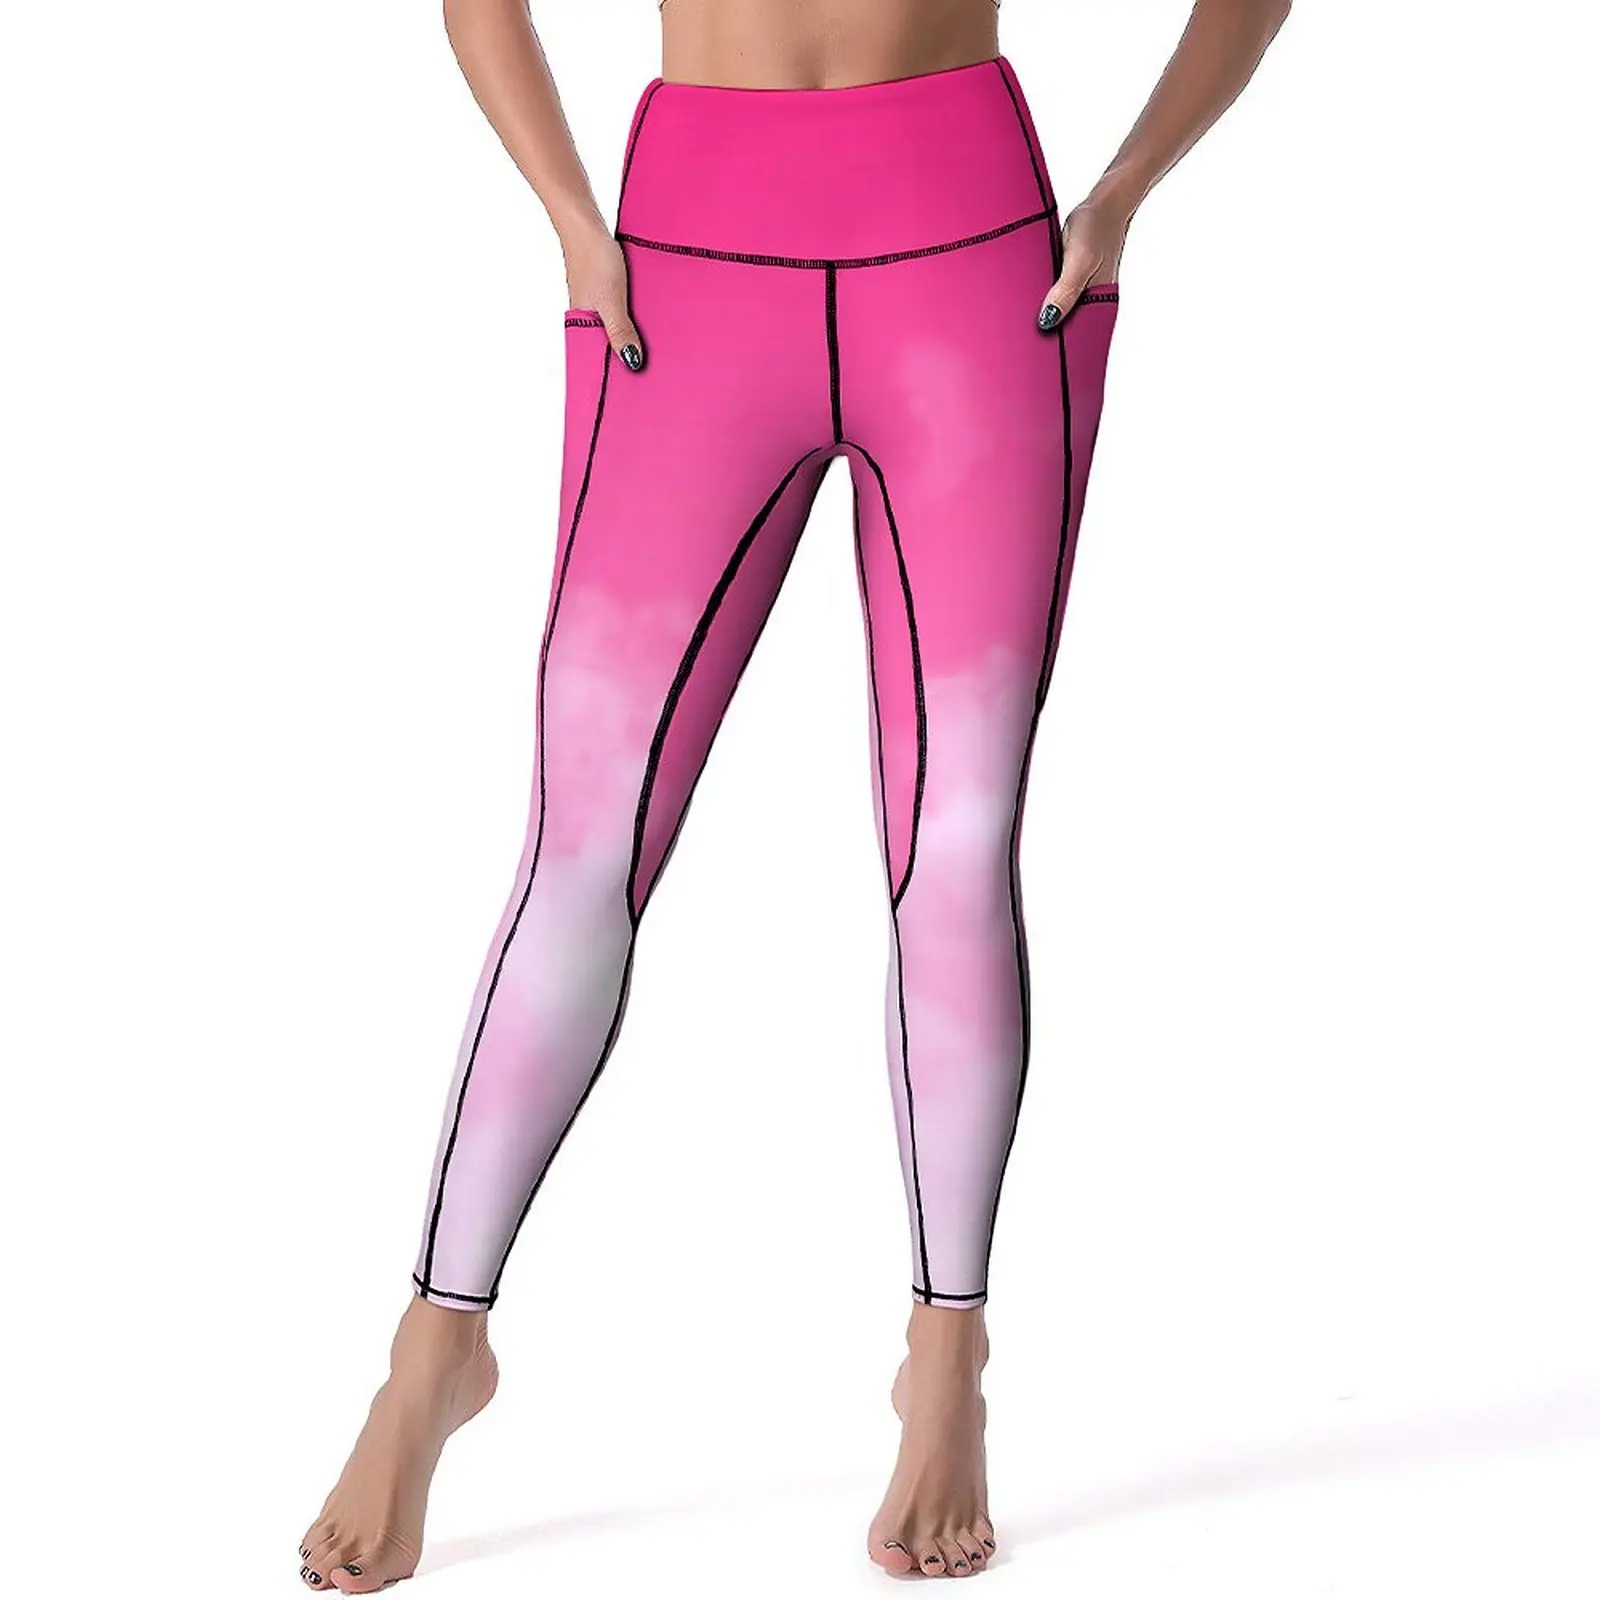 

Soft Cloud Leggings Sexy Pink Sky Print Push Up Yoga Pants Casual Stretch Leggins Women Design Workout Sports Tights